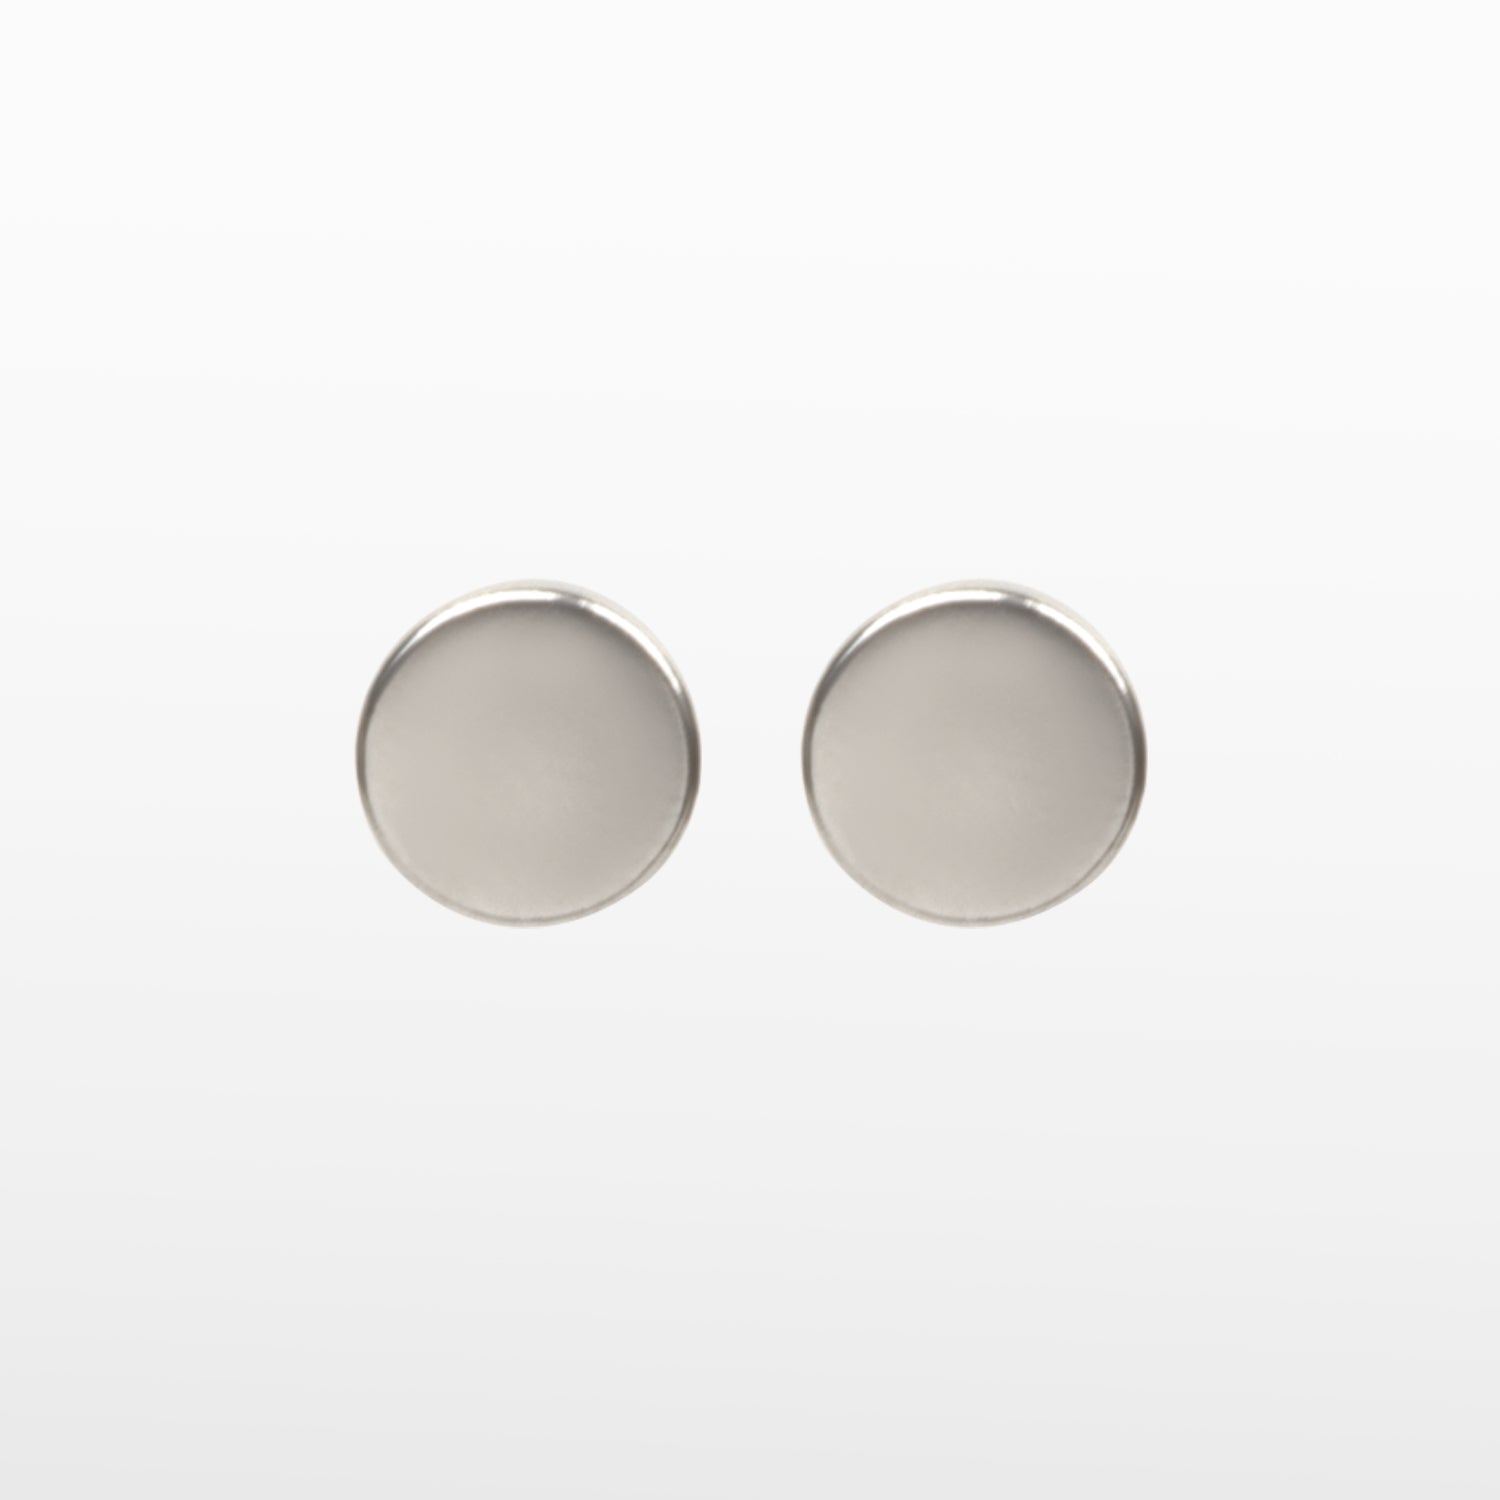 Image of the Magnetic Stud Clip-on Earrings in Silver are a must-have for all types of ears. These earrings feature a secure, magnetic closure that allows for comfortable wear for up to 6-8 hours. Crafted from stainless steel, this earring set includes one pair.